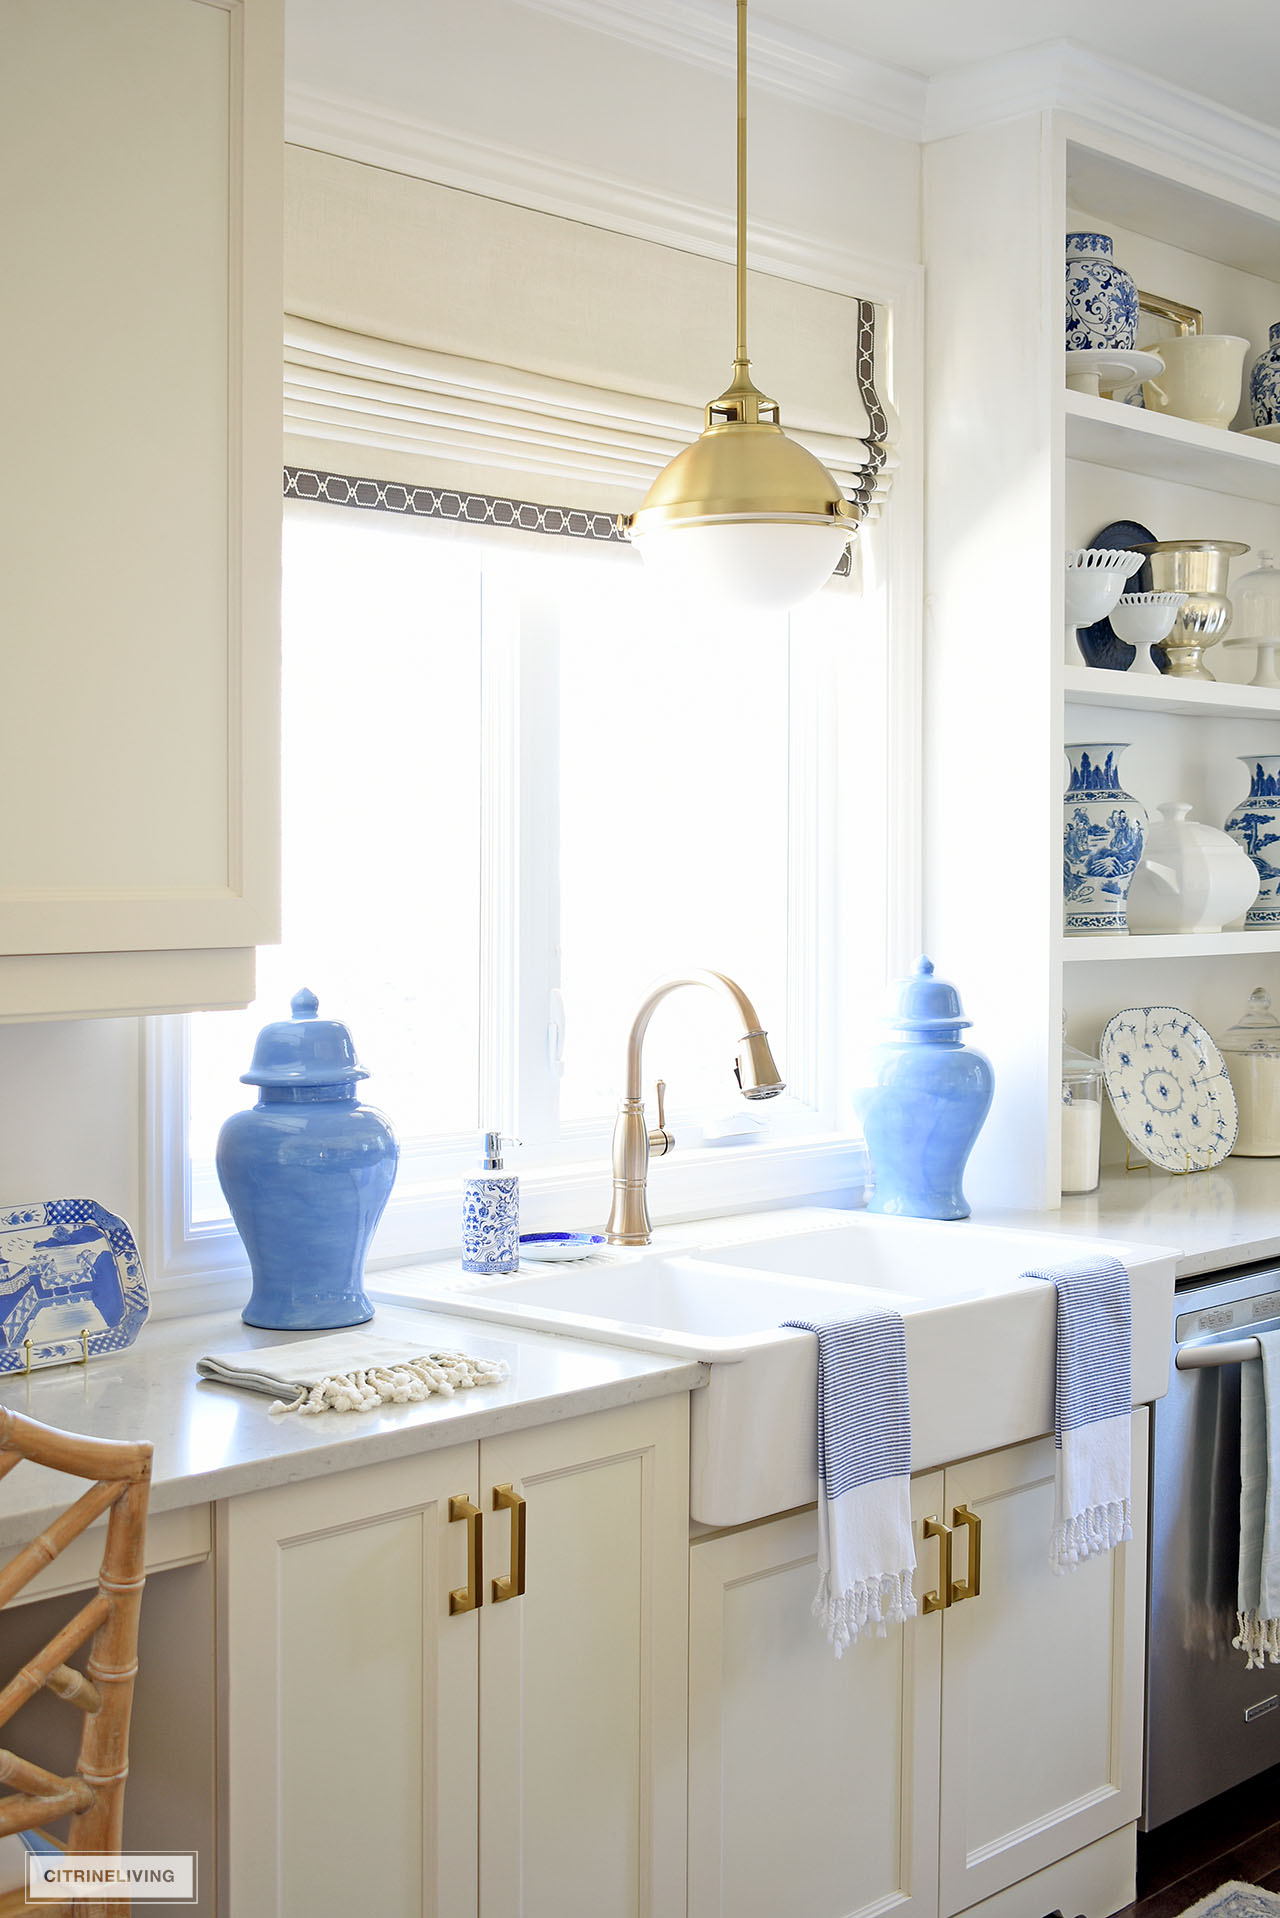 White kitchen farm sink decorated with blue ginger jars, pretty tea towels and blue and white accents.